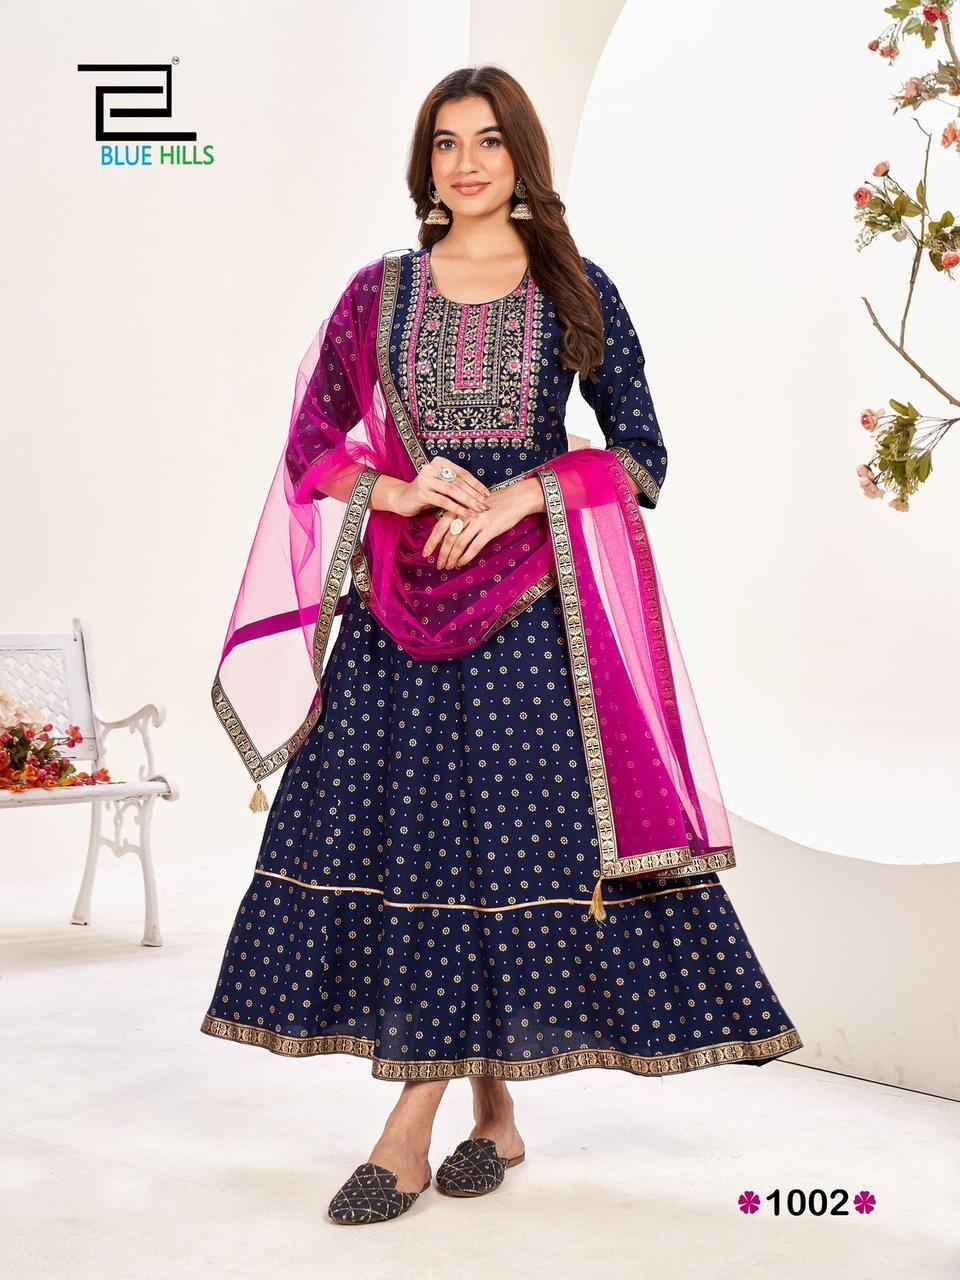 Blue Hills Manika Mage Hithe Vol 20 Rayon Gown With Dupatta 6 pcs Catalogue